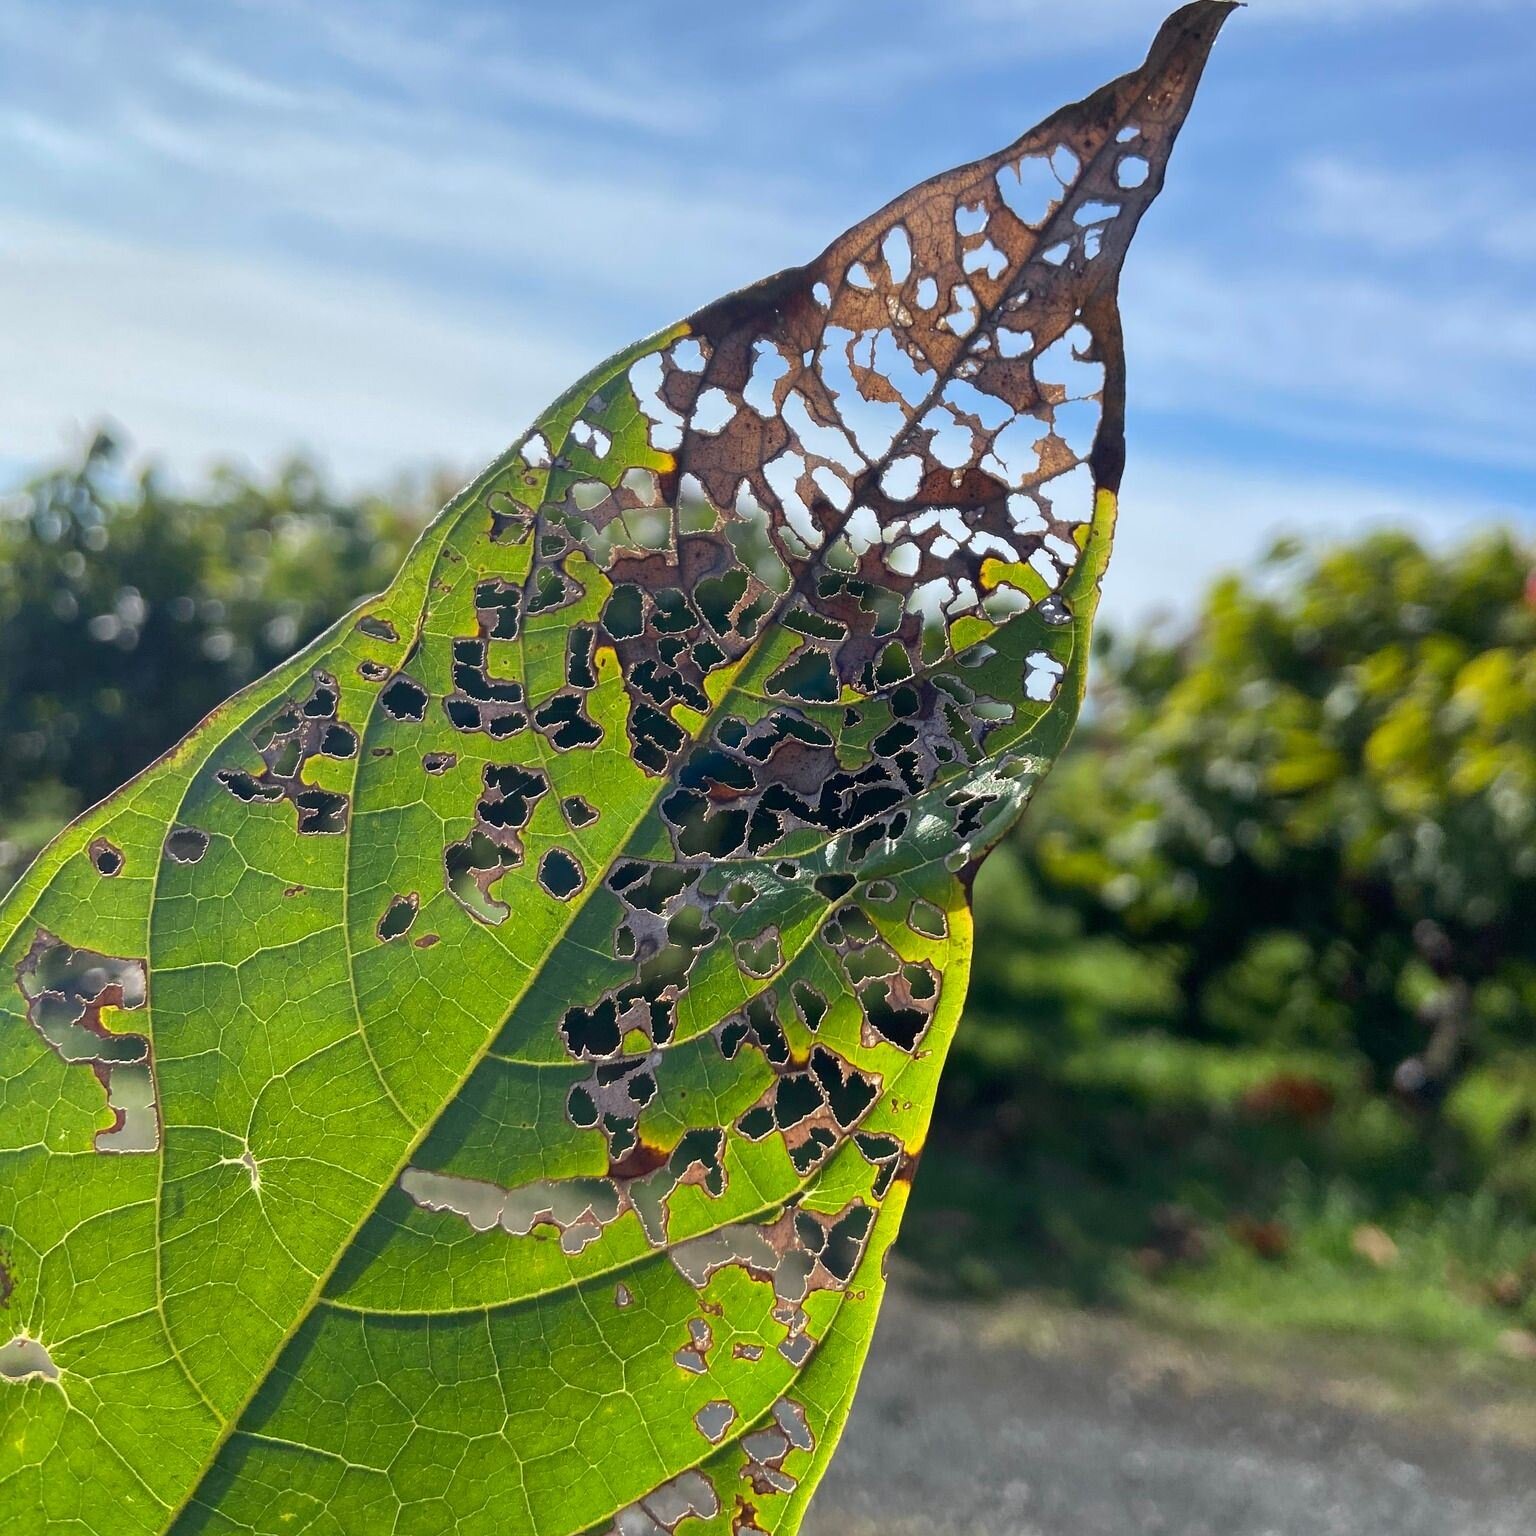 The holes in this leaf are caused by a pest here in Hawaii called a Rose Beetle. These beetles are nocturnal, and very small. They fly at an angle trying to hook onto a young tree. However we put a small plastic bag around the tree that is too tall f